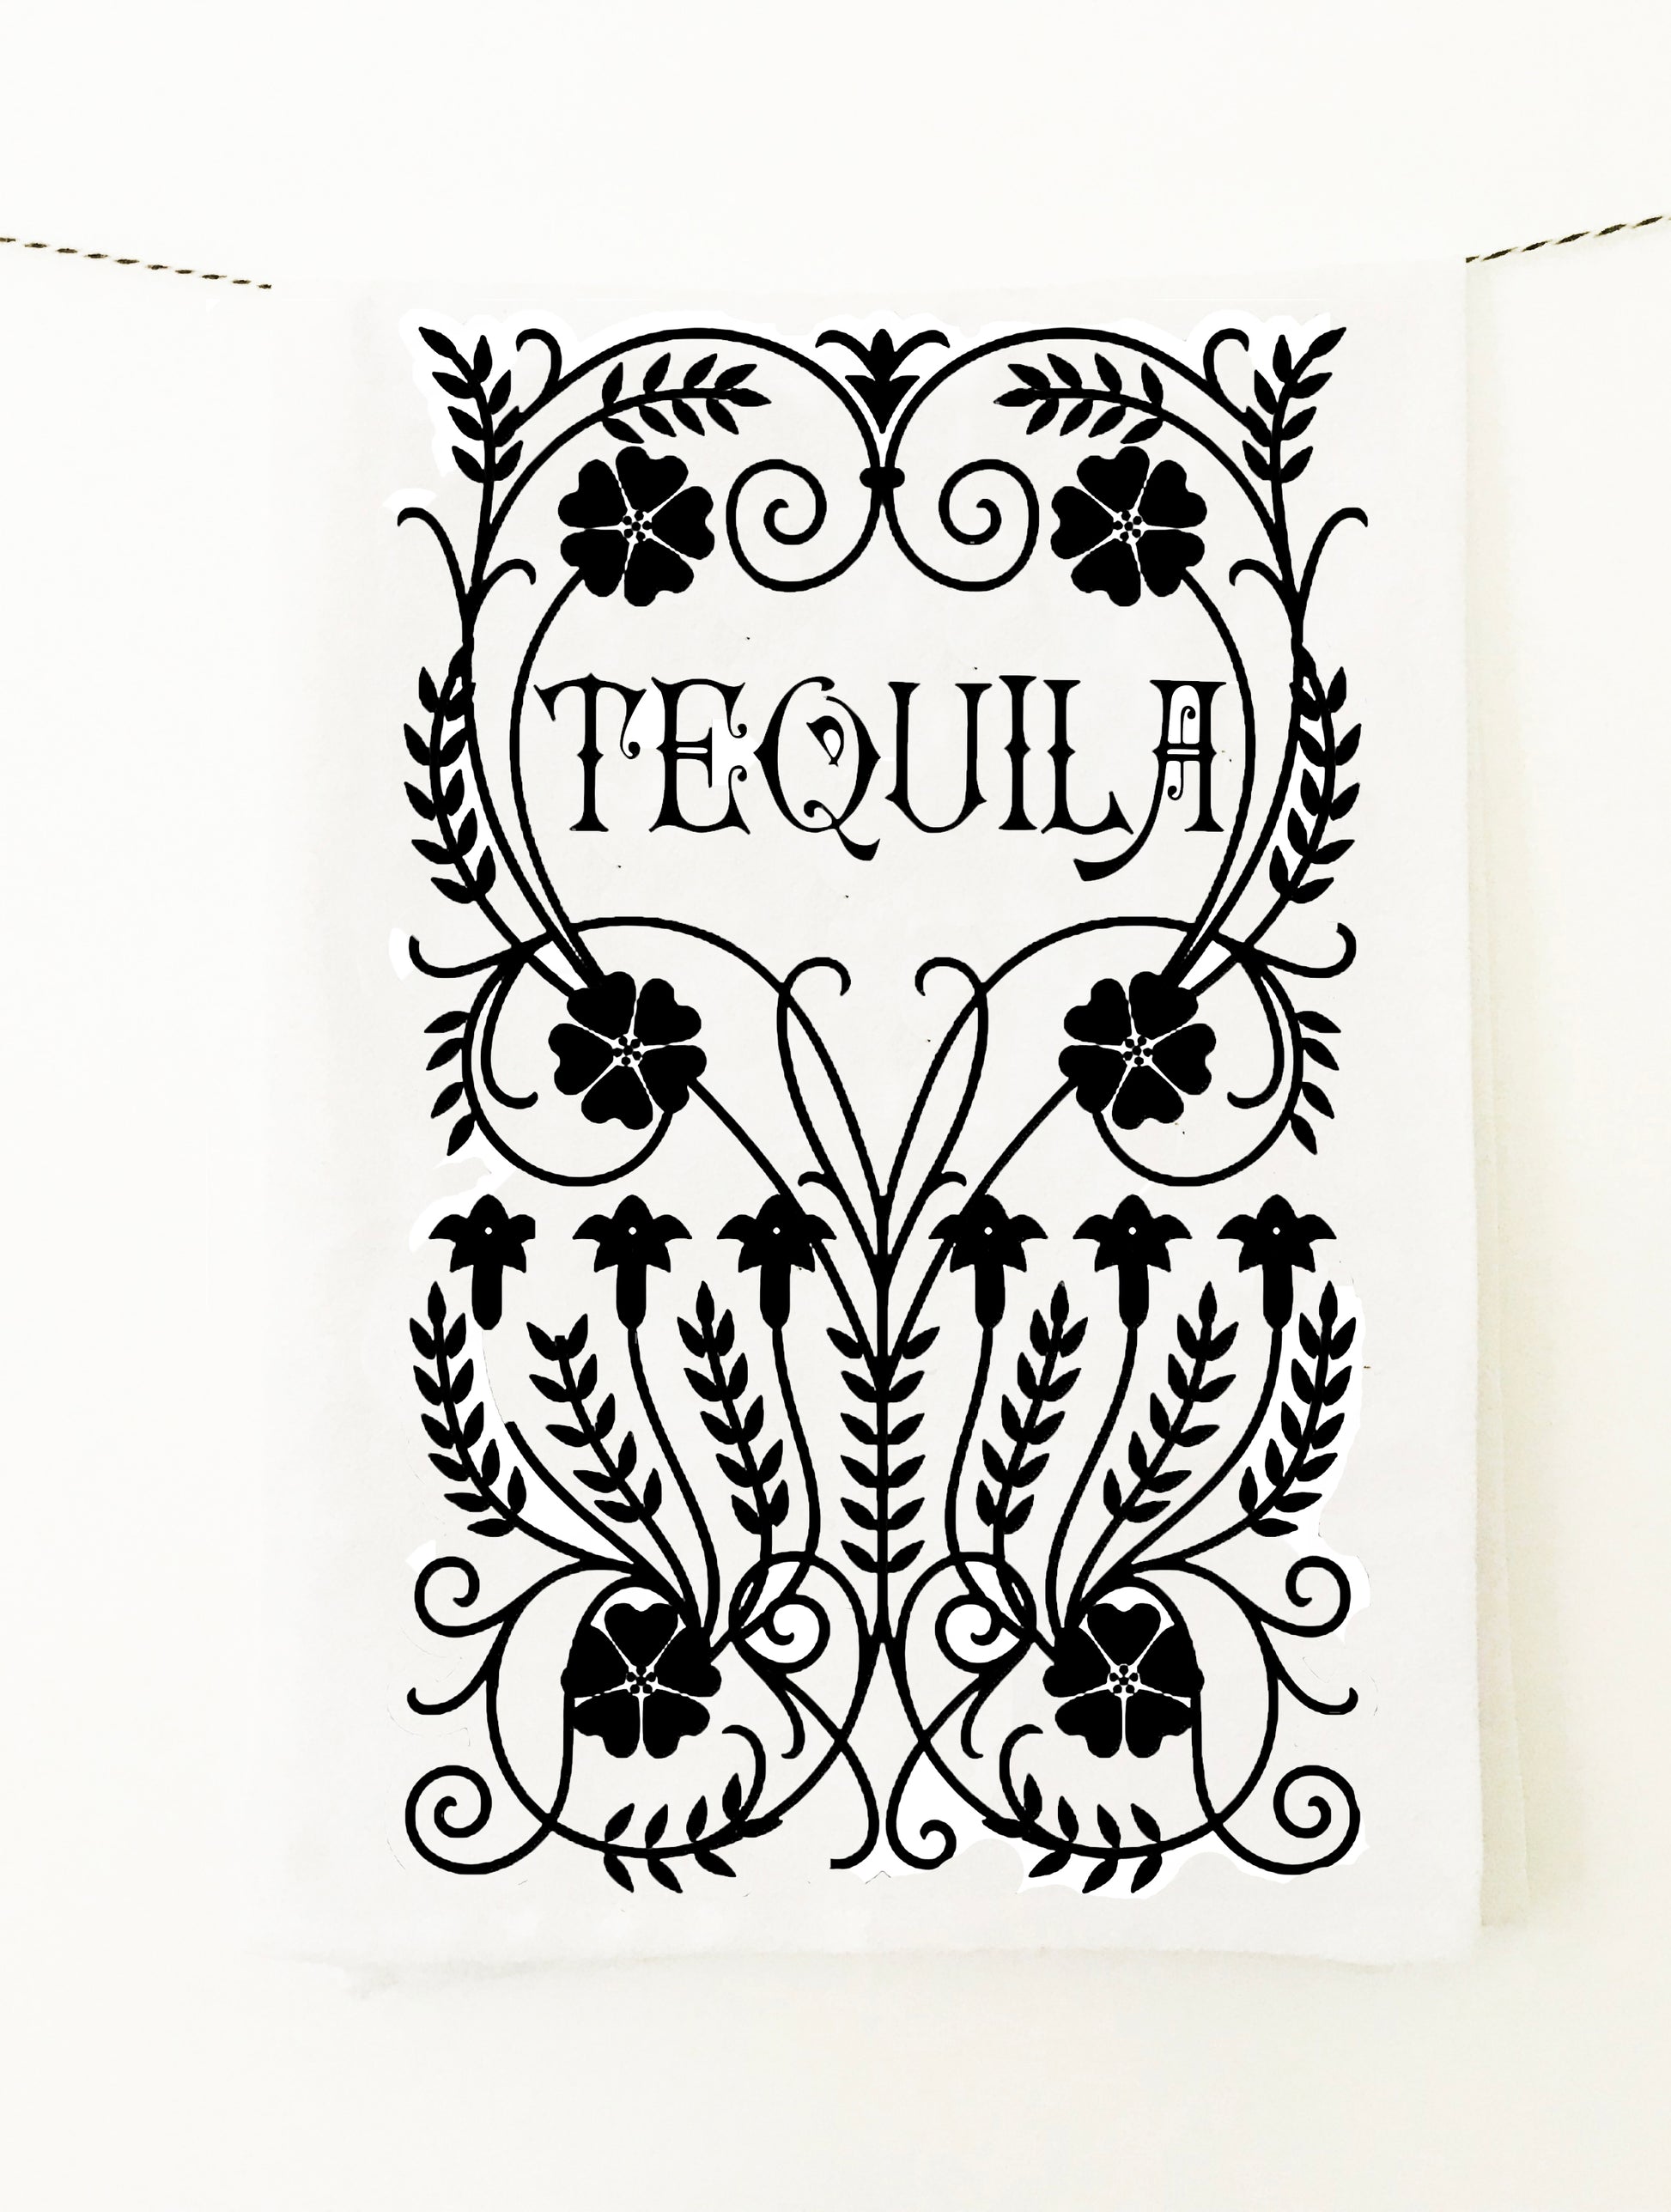 bar towel liquor tequila theme symmetrical floral design screen print drinks with friends cute retro mexican folk large quality cotton towel  coin laundry 